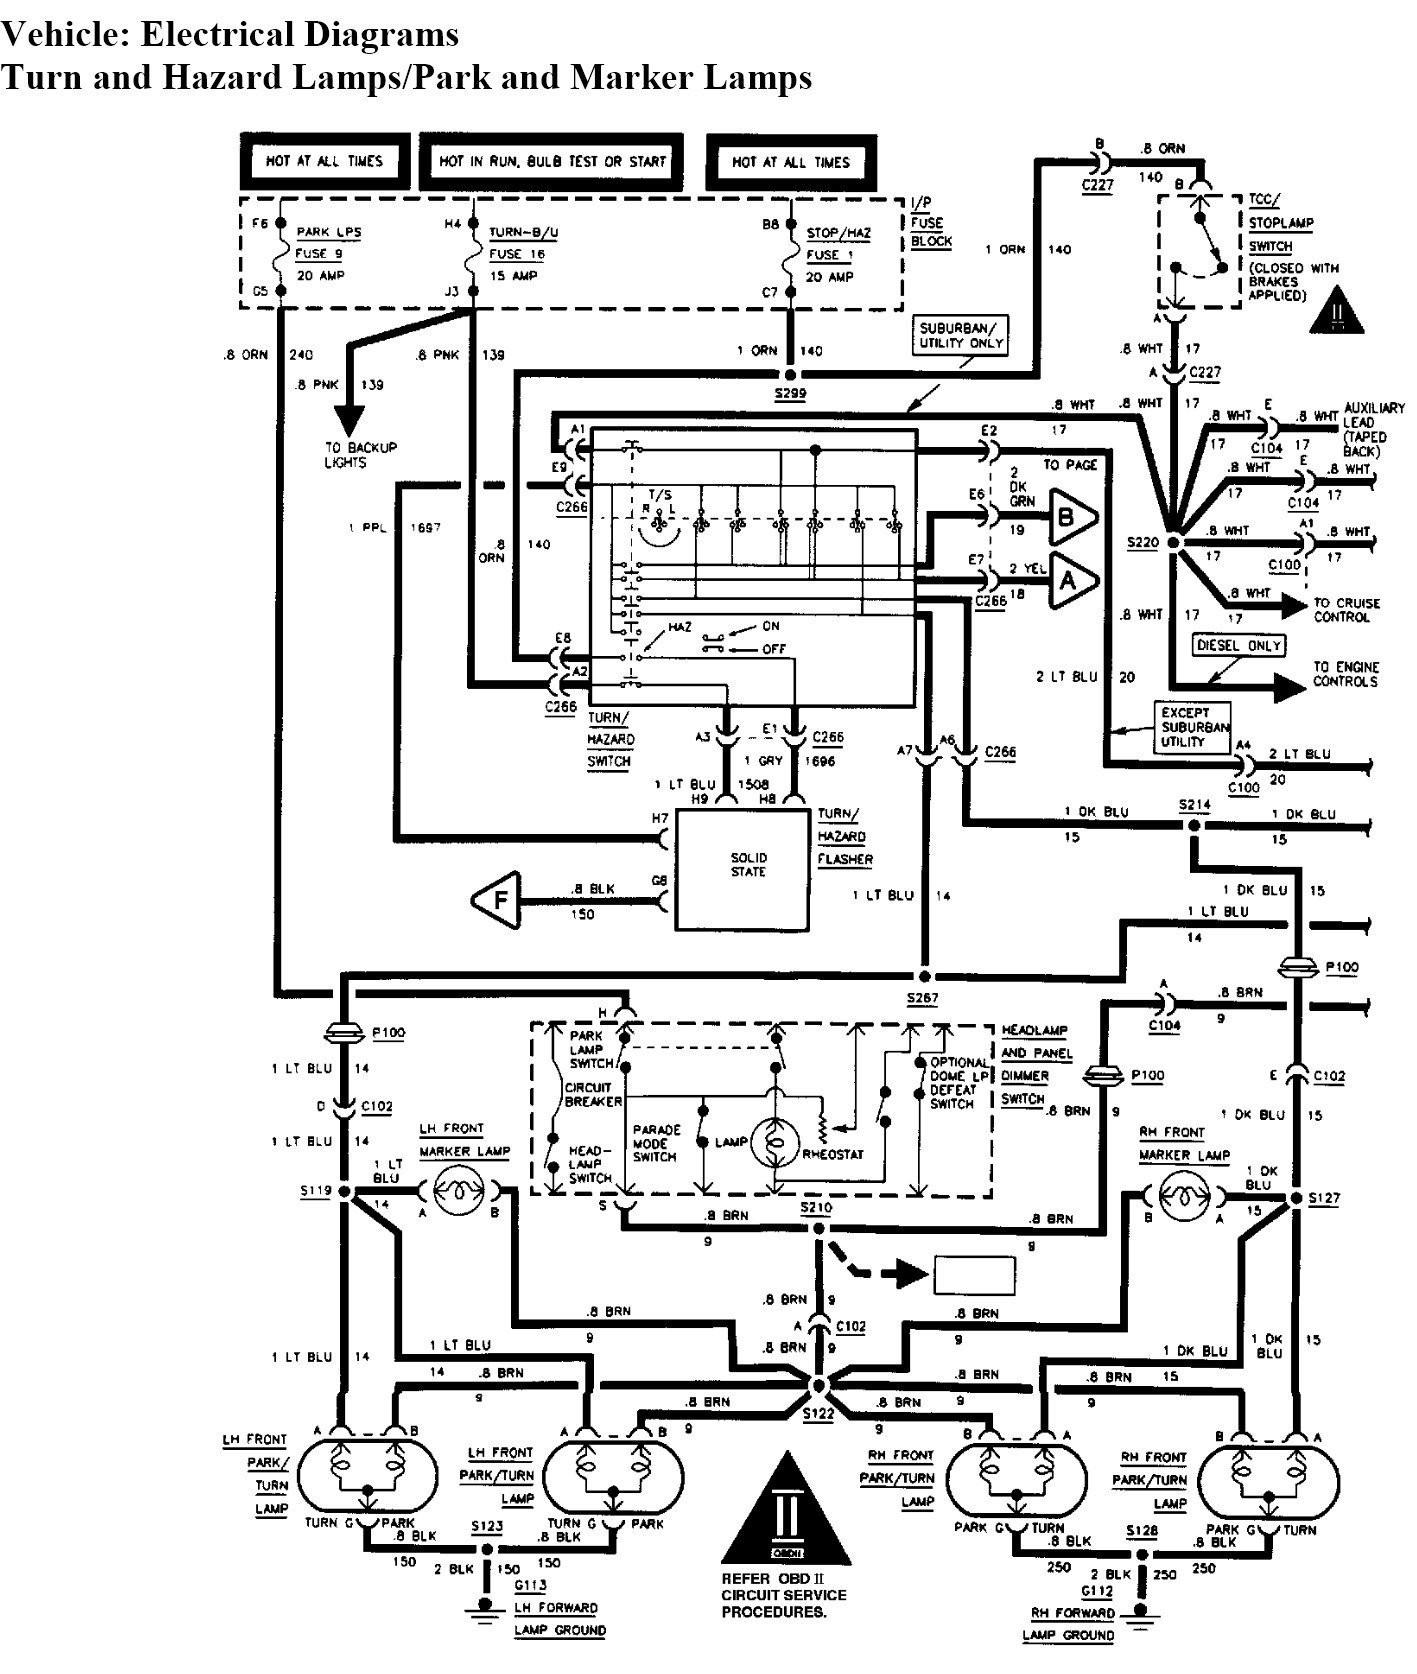 Tail Light Wiring Diagram Chevy from detoxicrecenze.com